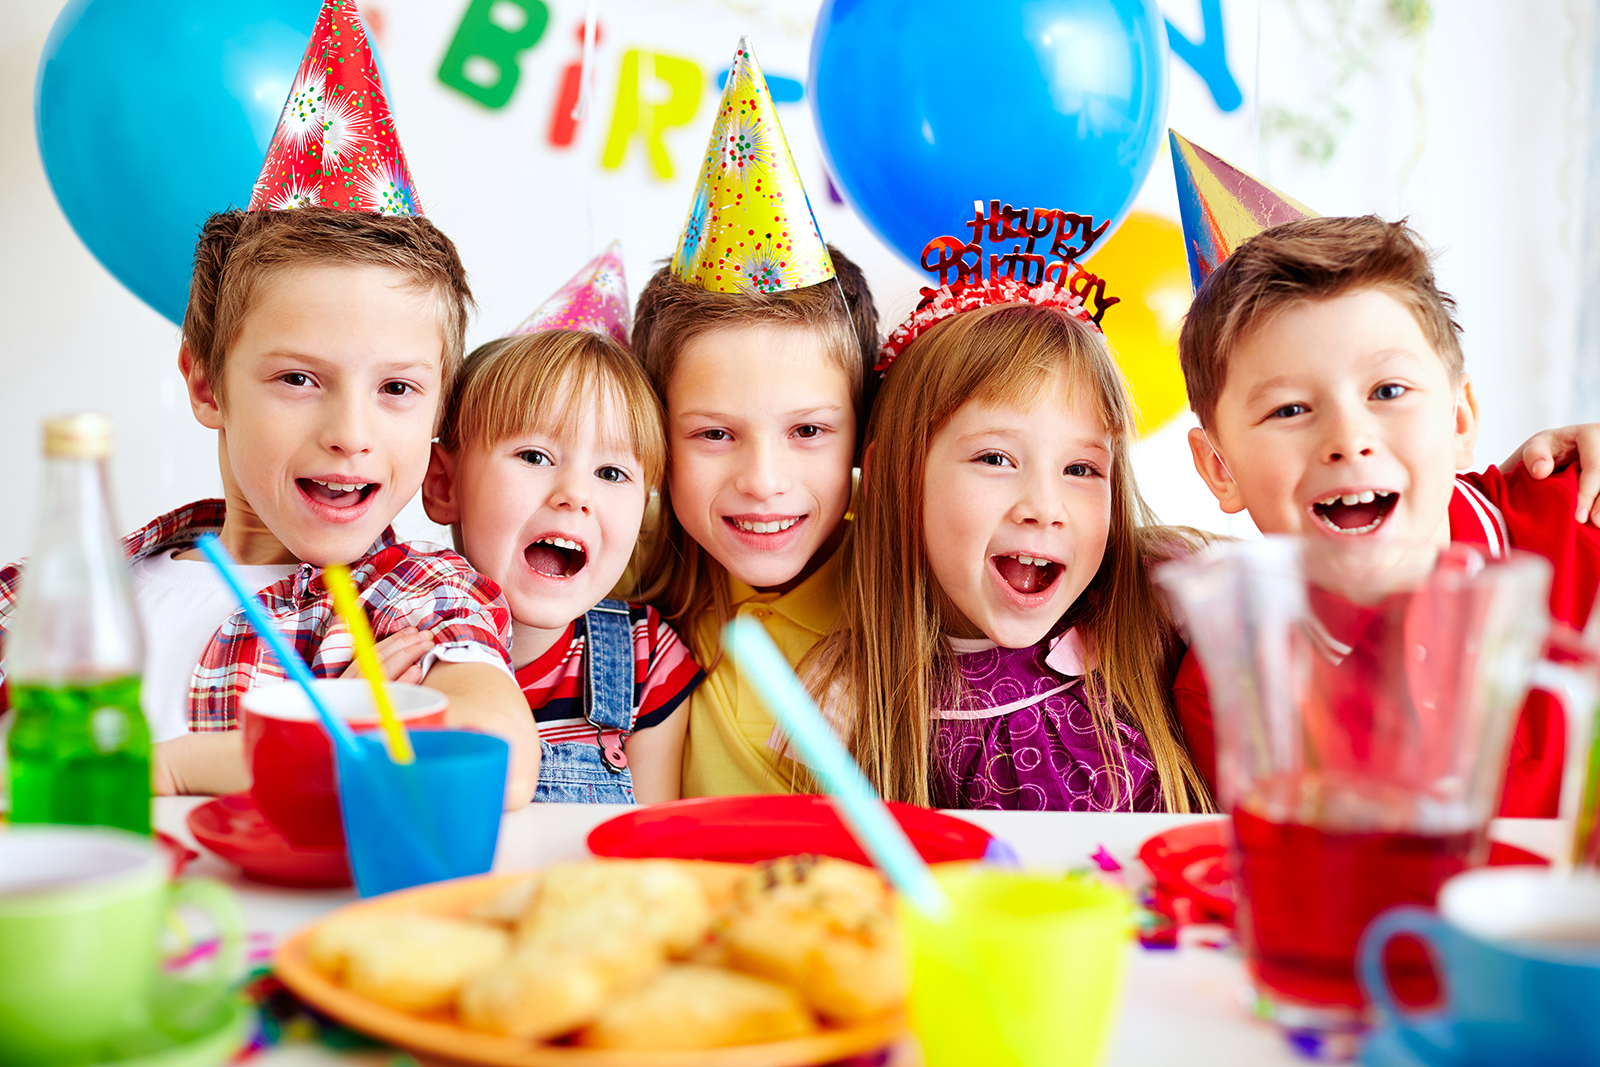 The 5 Challenges to Throwing a Good Kid’s Birthday Party